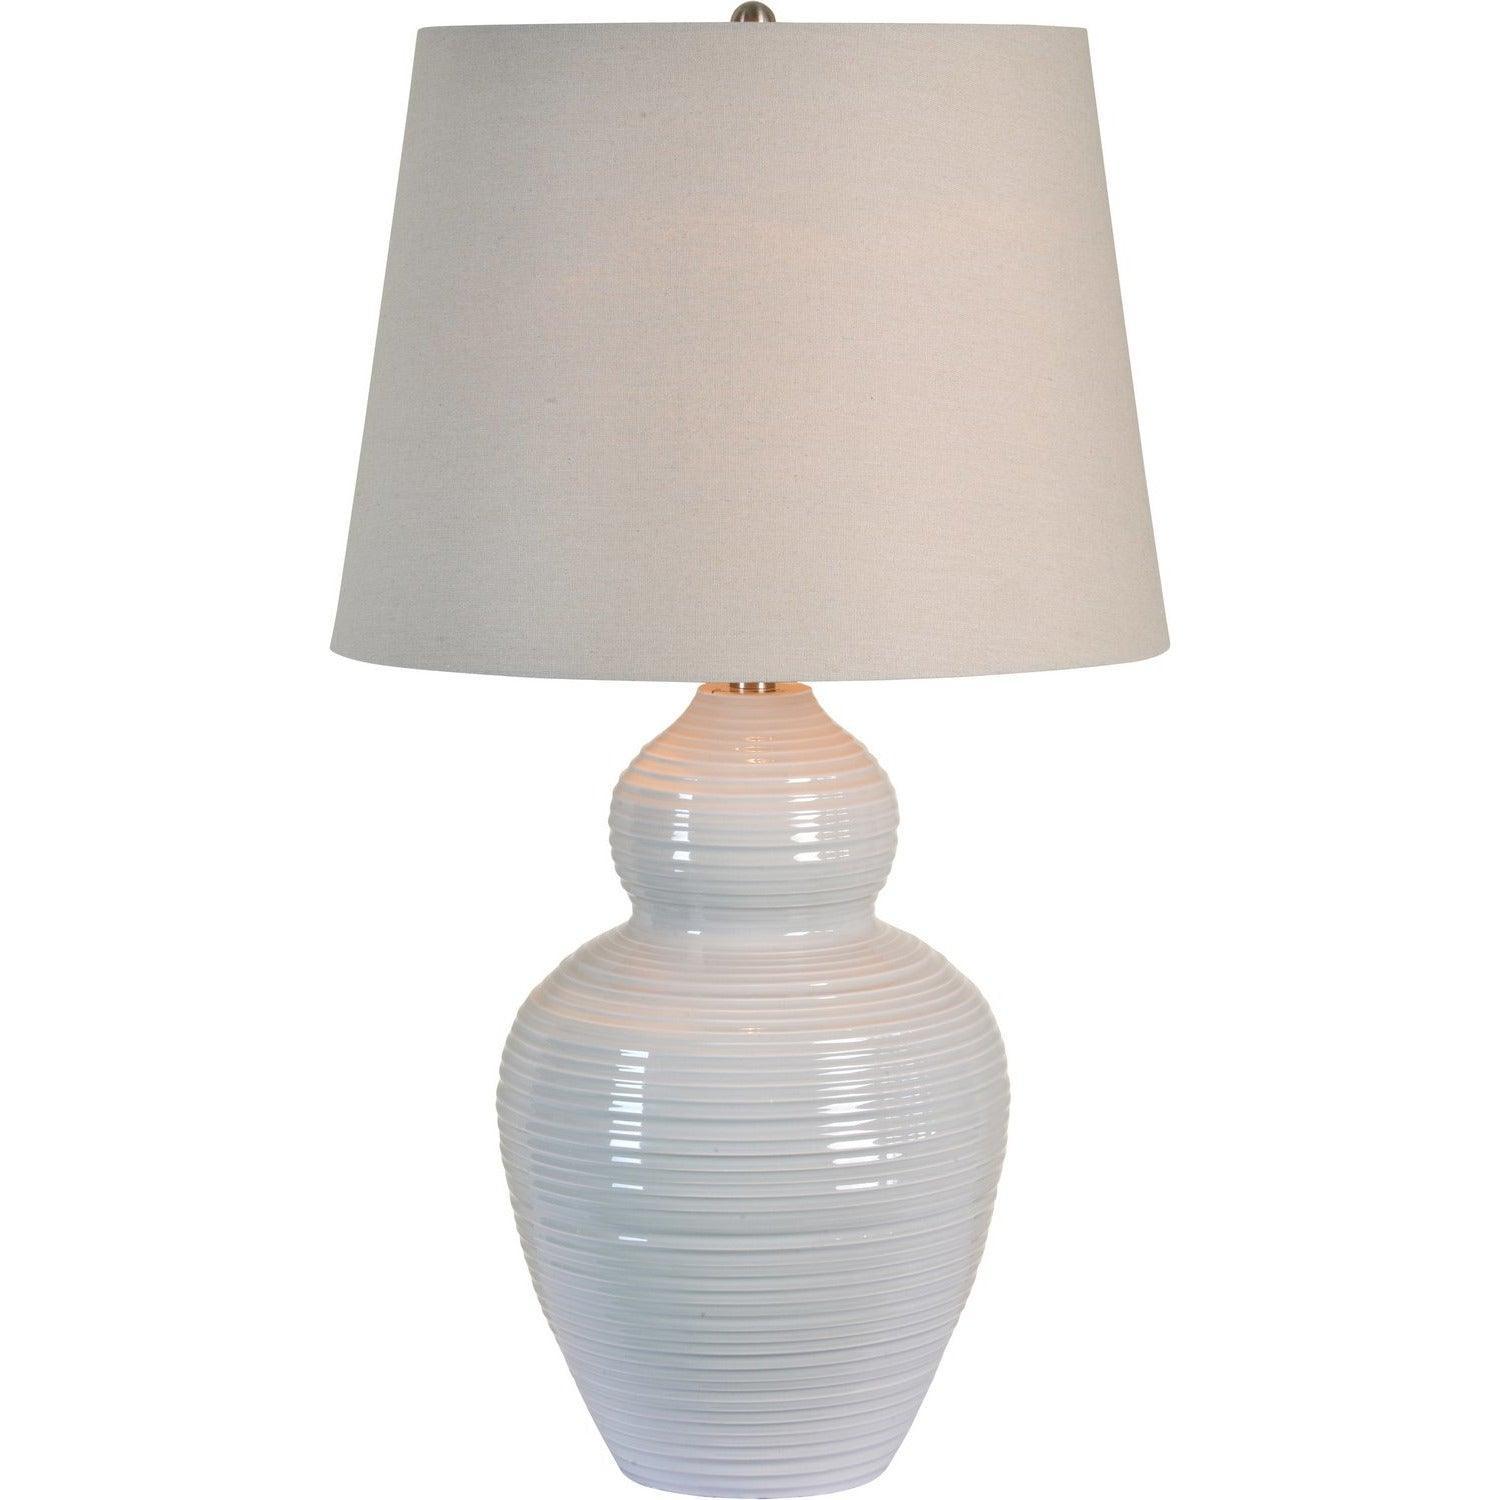 Montreal Lighting & Hardware - Latchmore Table Lamp by Renwil - Montreal Lighting & Hardware